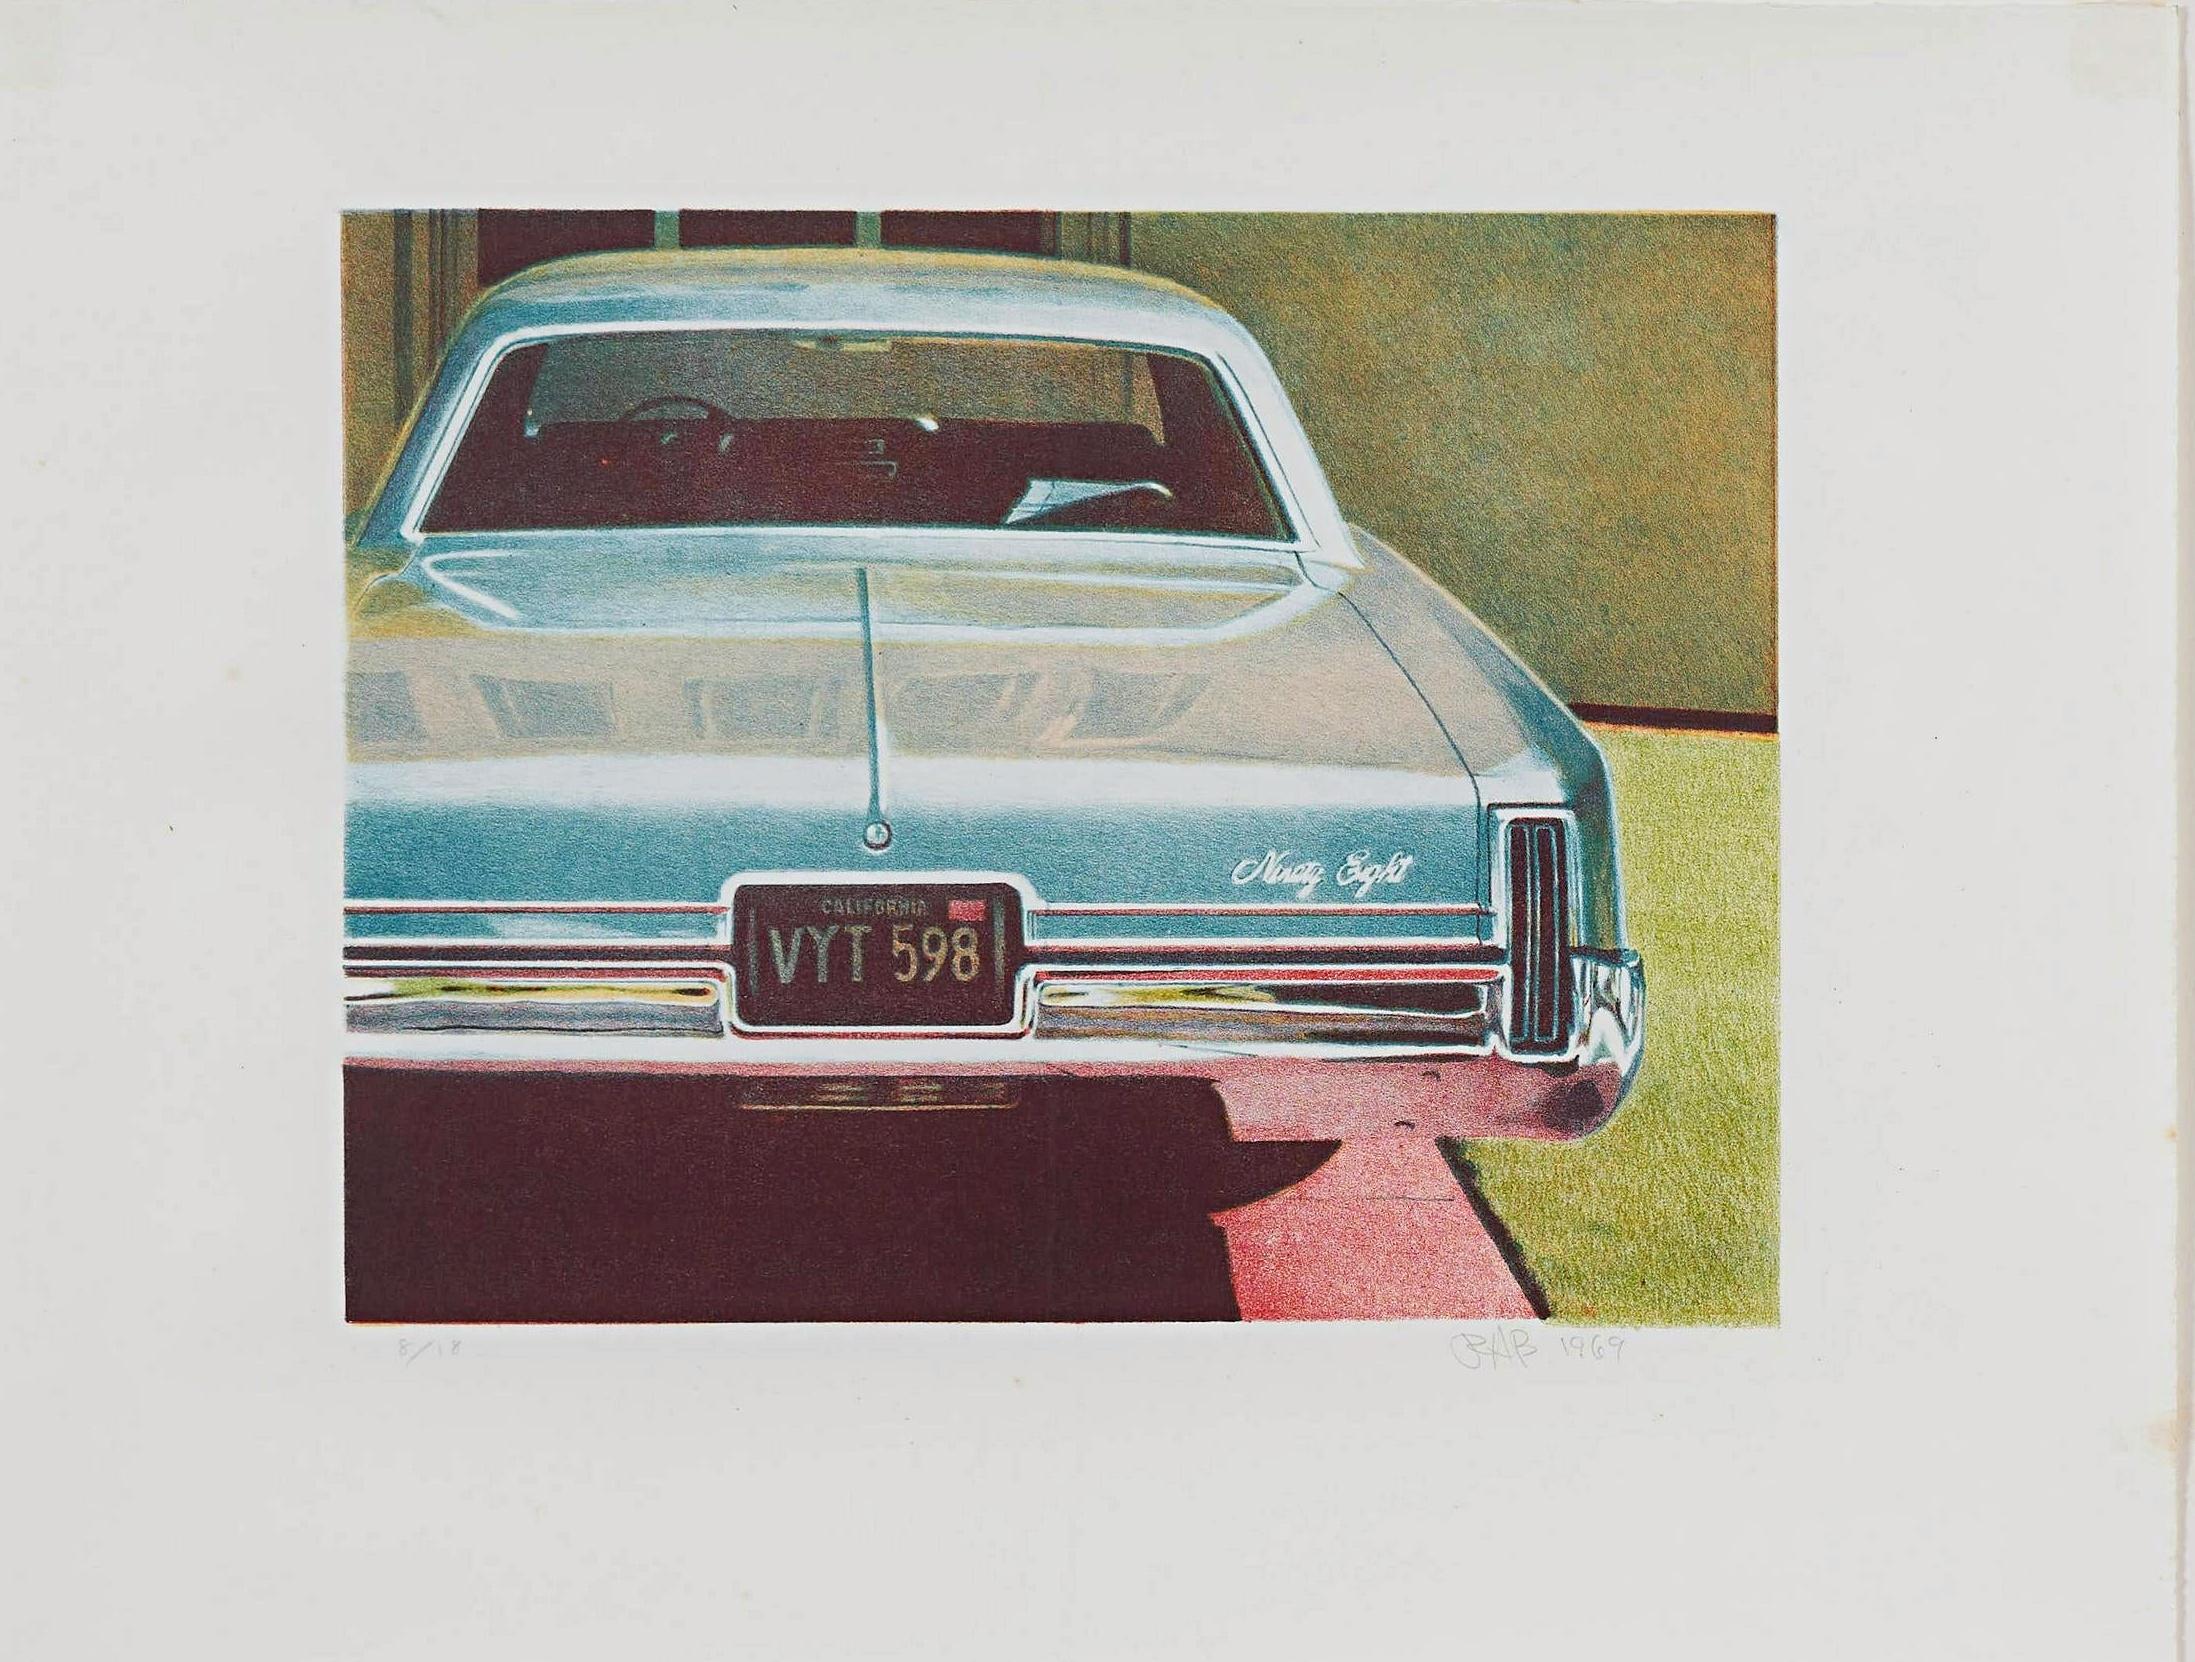 '68 Oldsmobile Iconic mid century modern photorealist lithograph photo realist  - Print by Robert Bechtle